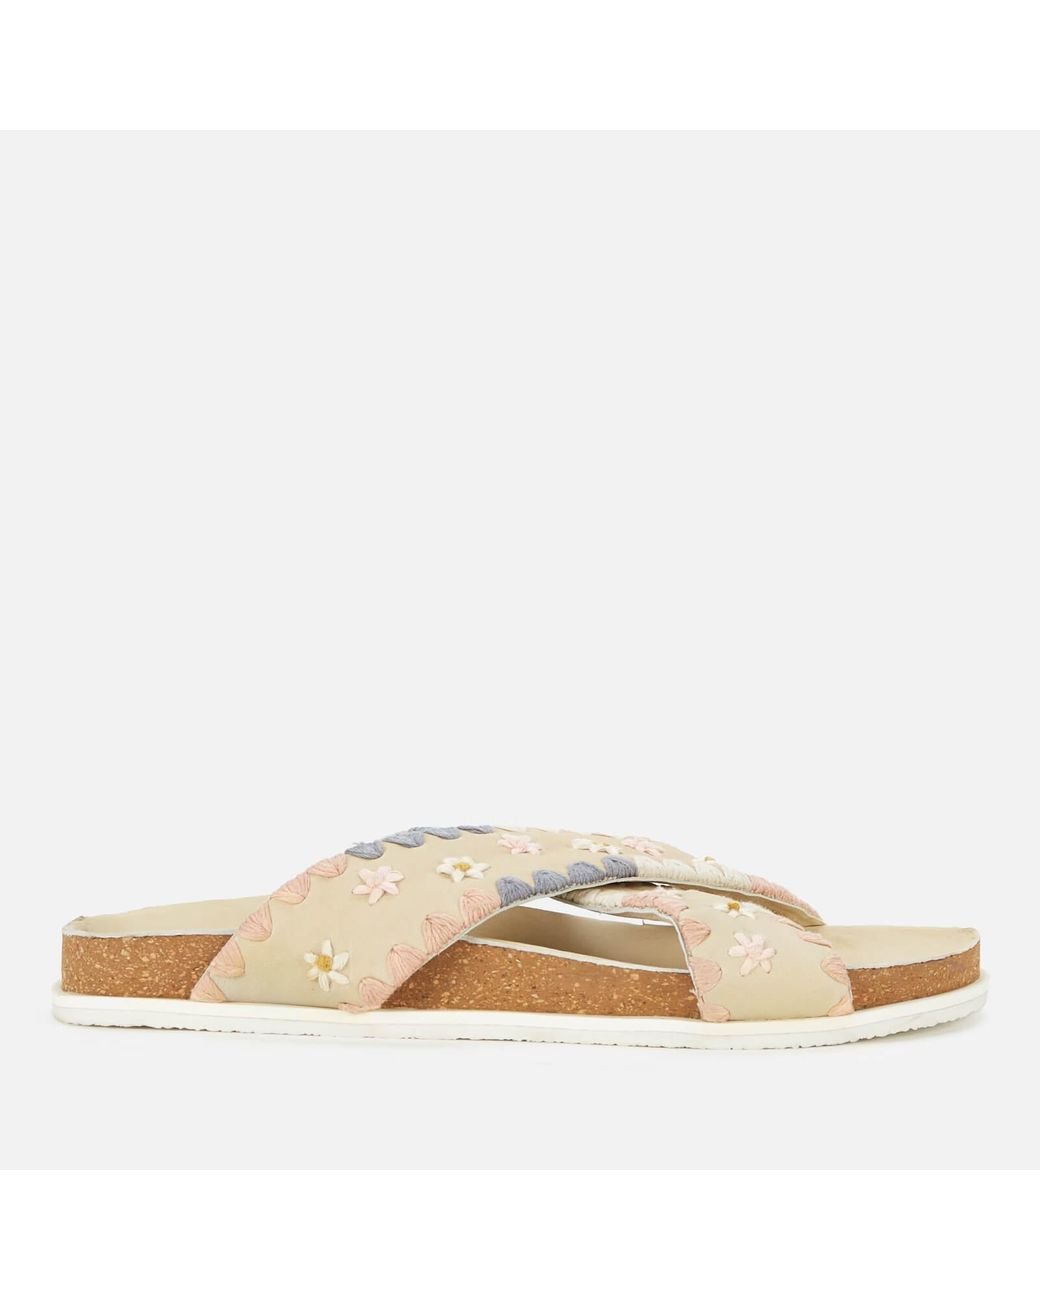 Free People Wildflowers Crossband Sandals in Natural | Lyst